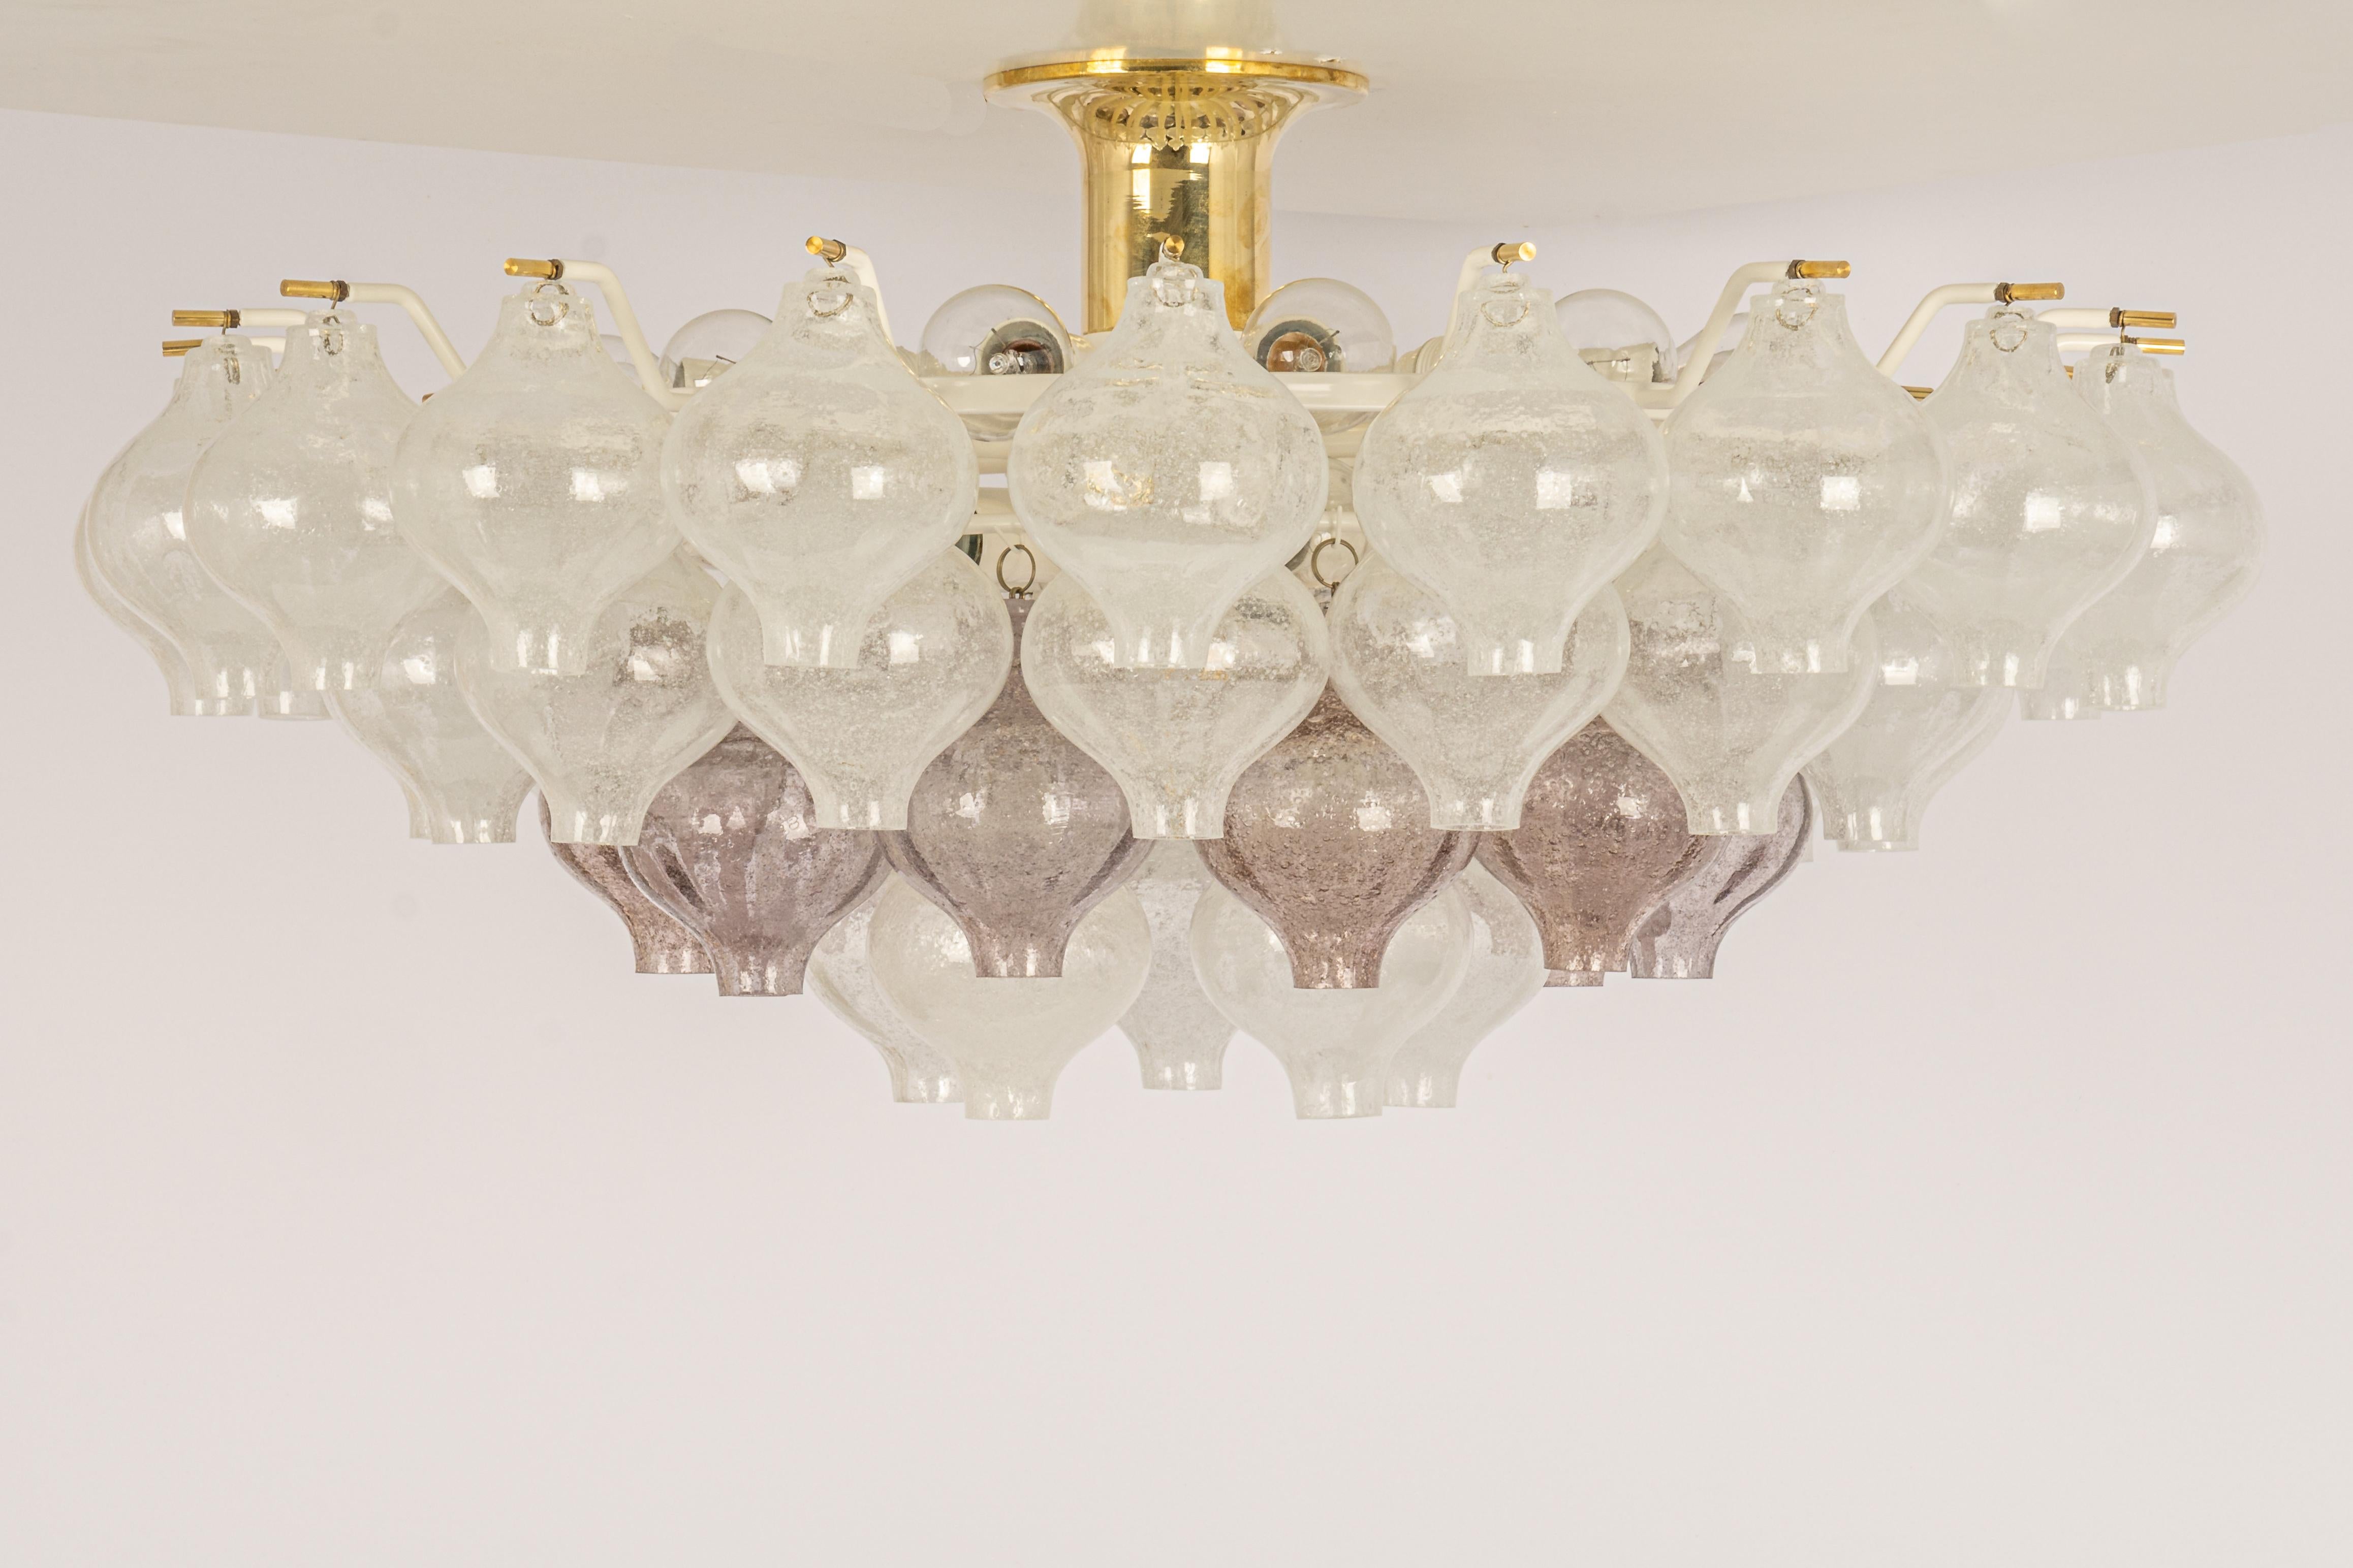 Wonderful onion-shaped -Tulipan glass chandelier. 50 hand-blown glasses suspended on a white painted metal frame.
Best of design from the 1960s by Kalmar, Austria. High quality of the materials.

Sockets: The chandelier takes 21 small screw base